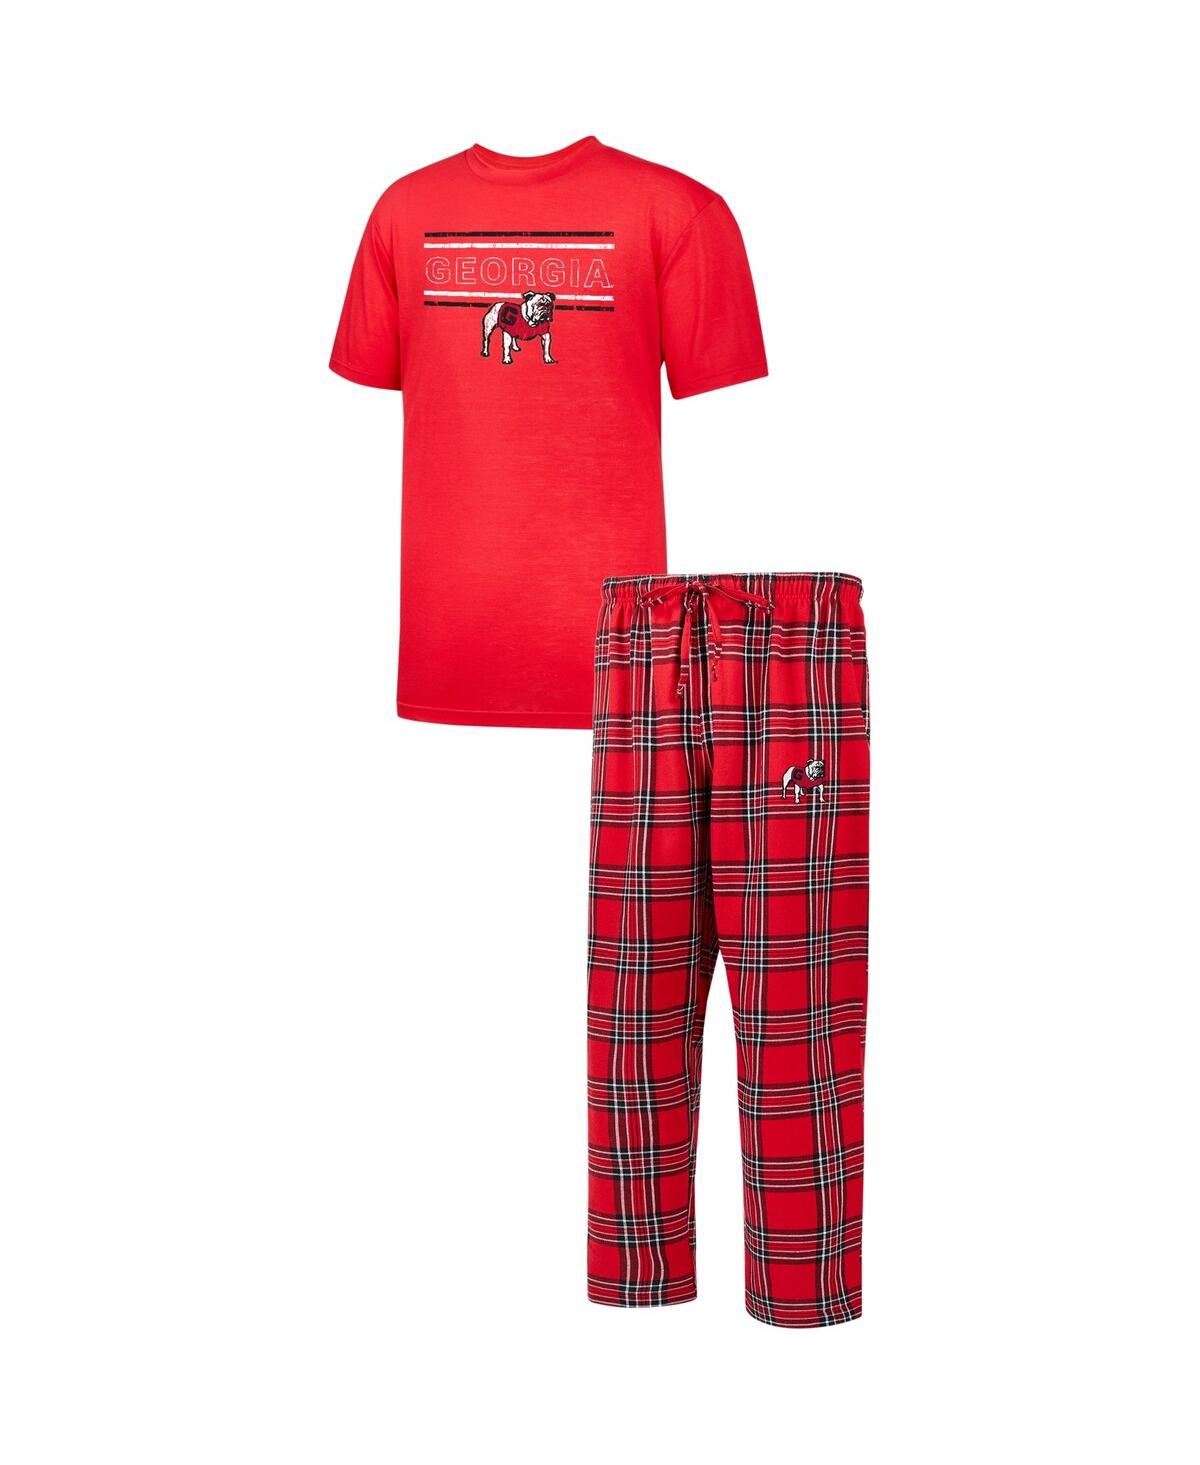 Men's Profile Red Georgia Bulldogs Big and Tall 2-Pack T-shirt and Flannel Pants Set - Red